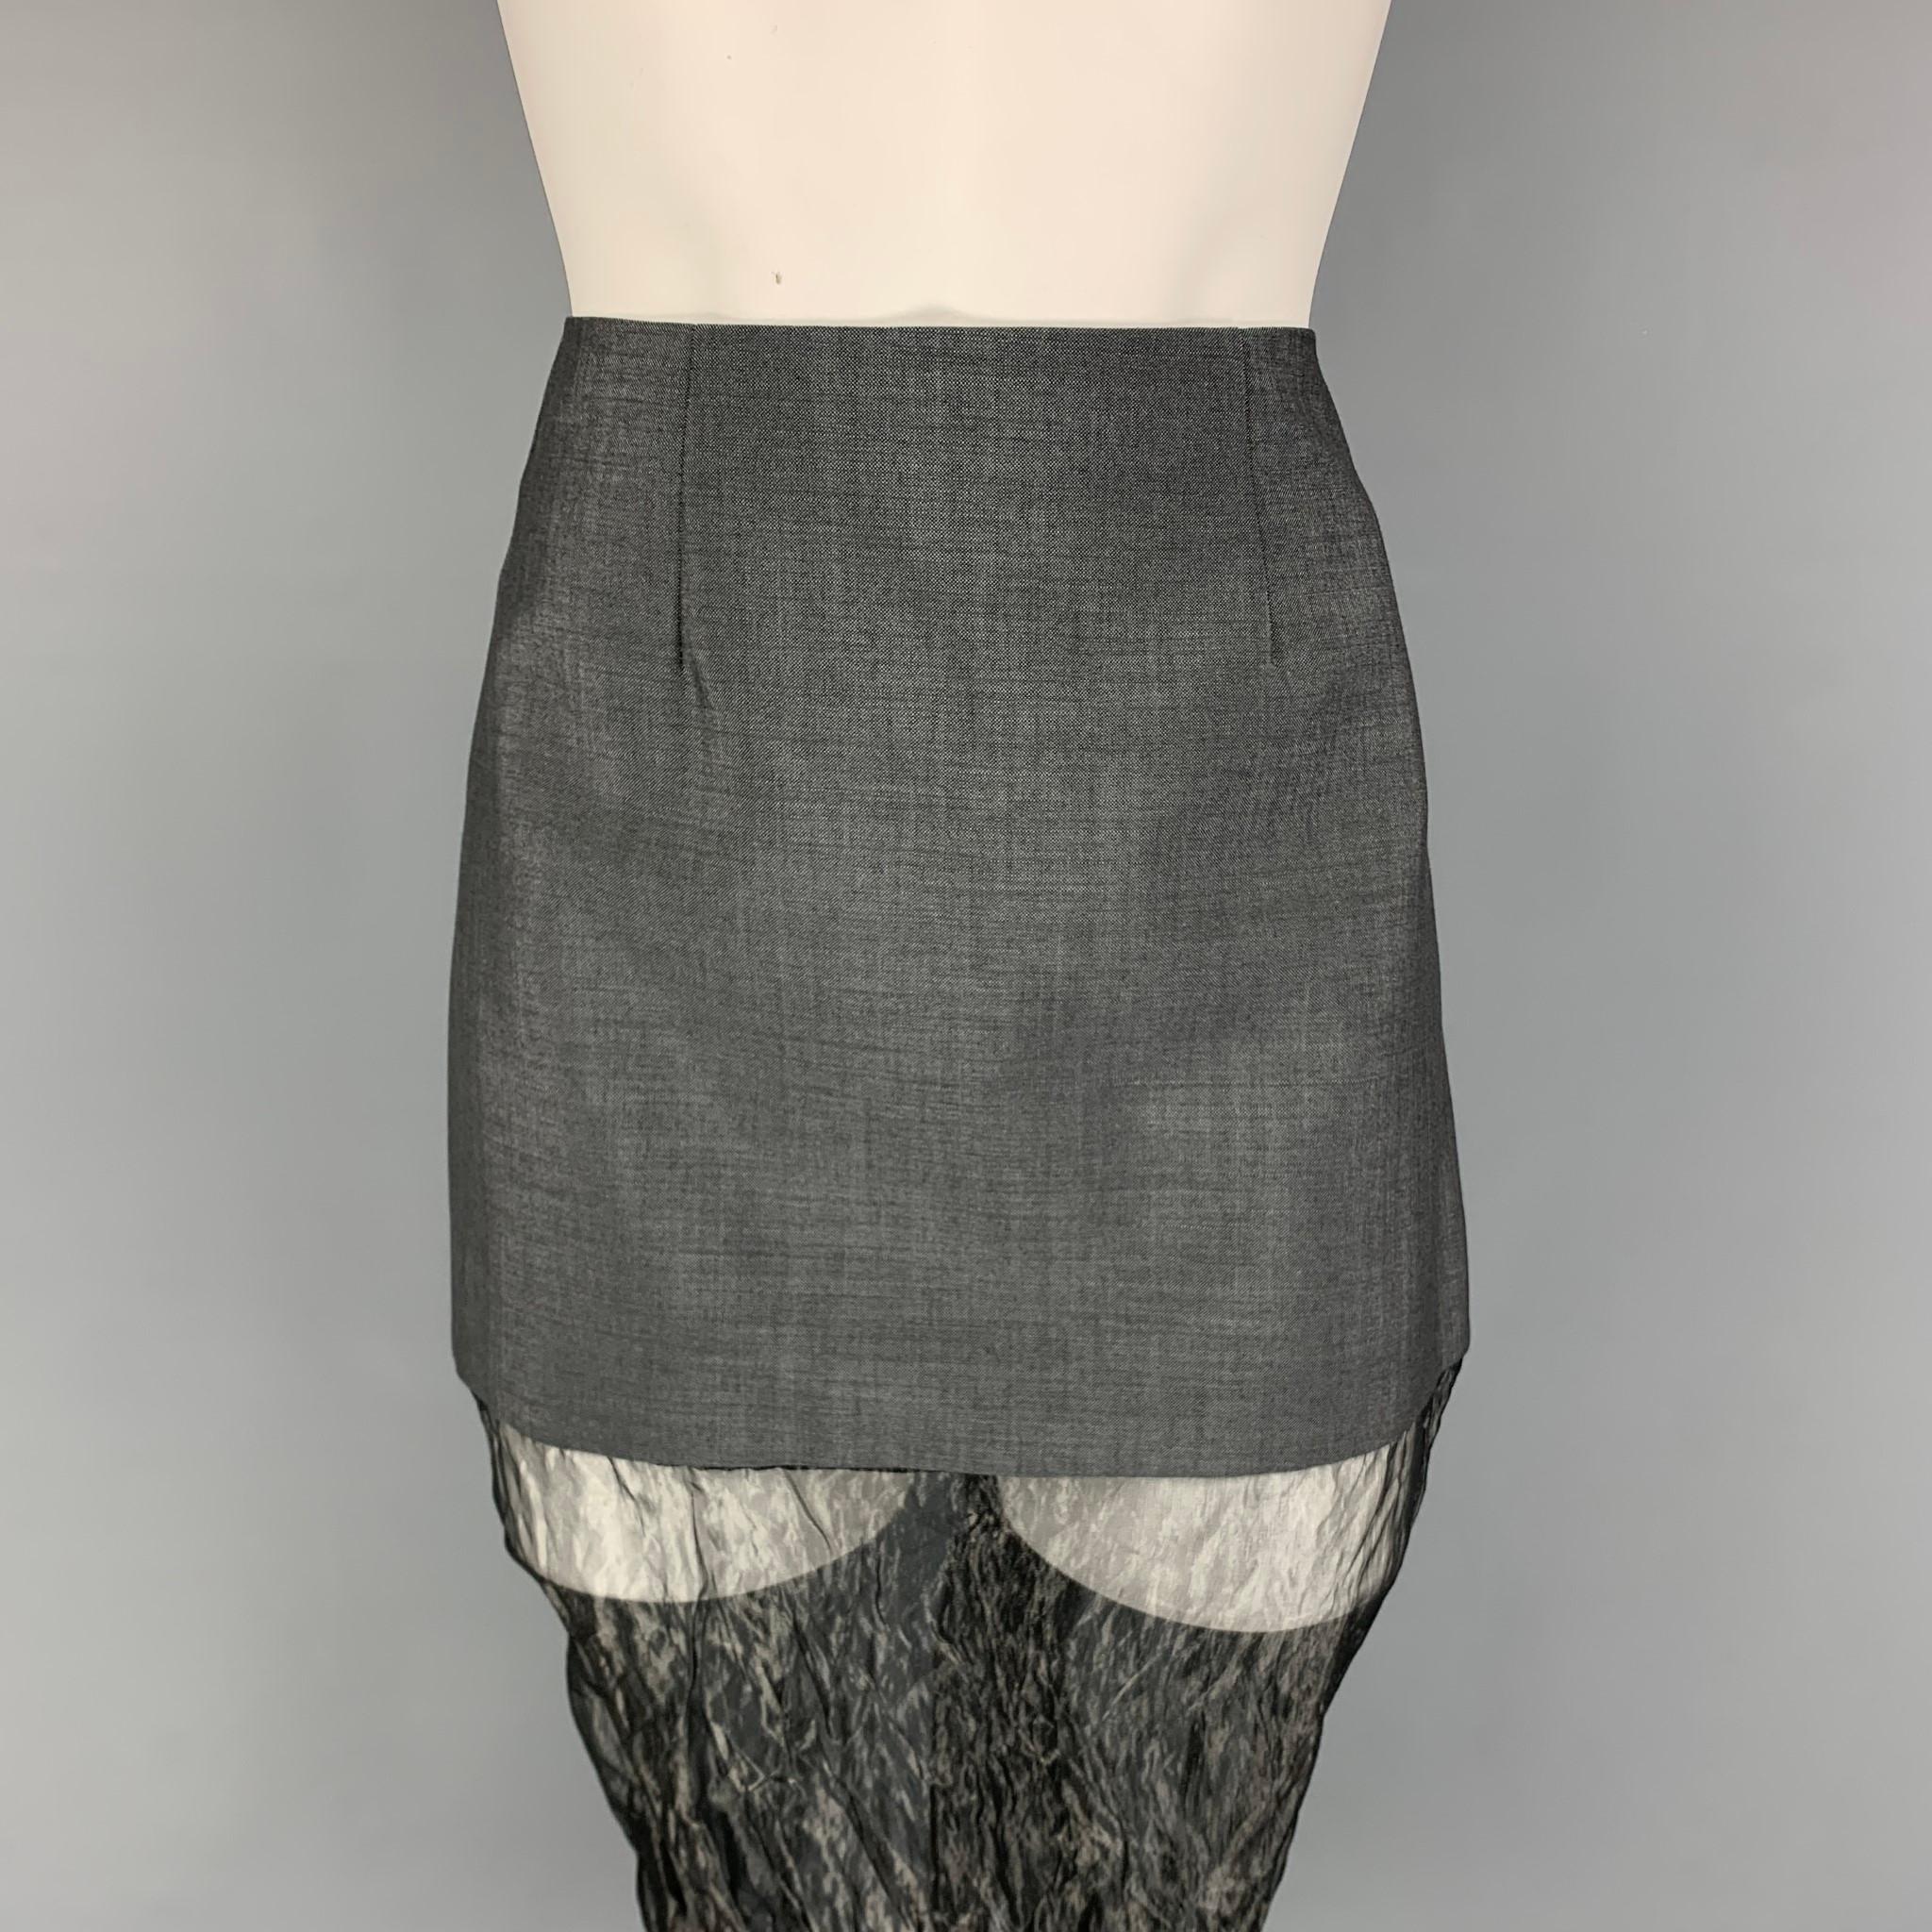 PRADA FW 22 skirt comes in a grey mohair blend featuring a mini style with a crinkled muslin insert, back slit, and a side zipper closure. Made in Italy.

Excellent Pre-Owned Condition.
Marked: 38
Original Retail Price: